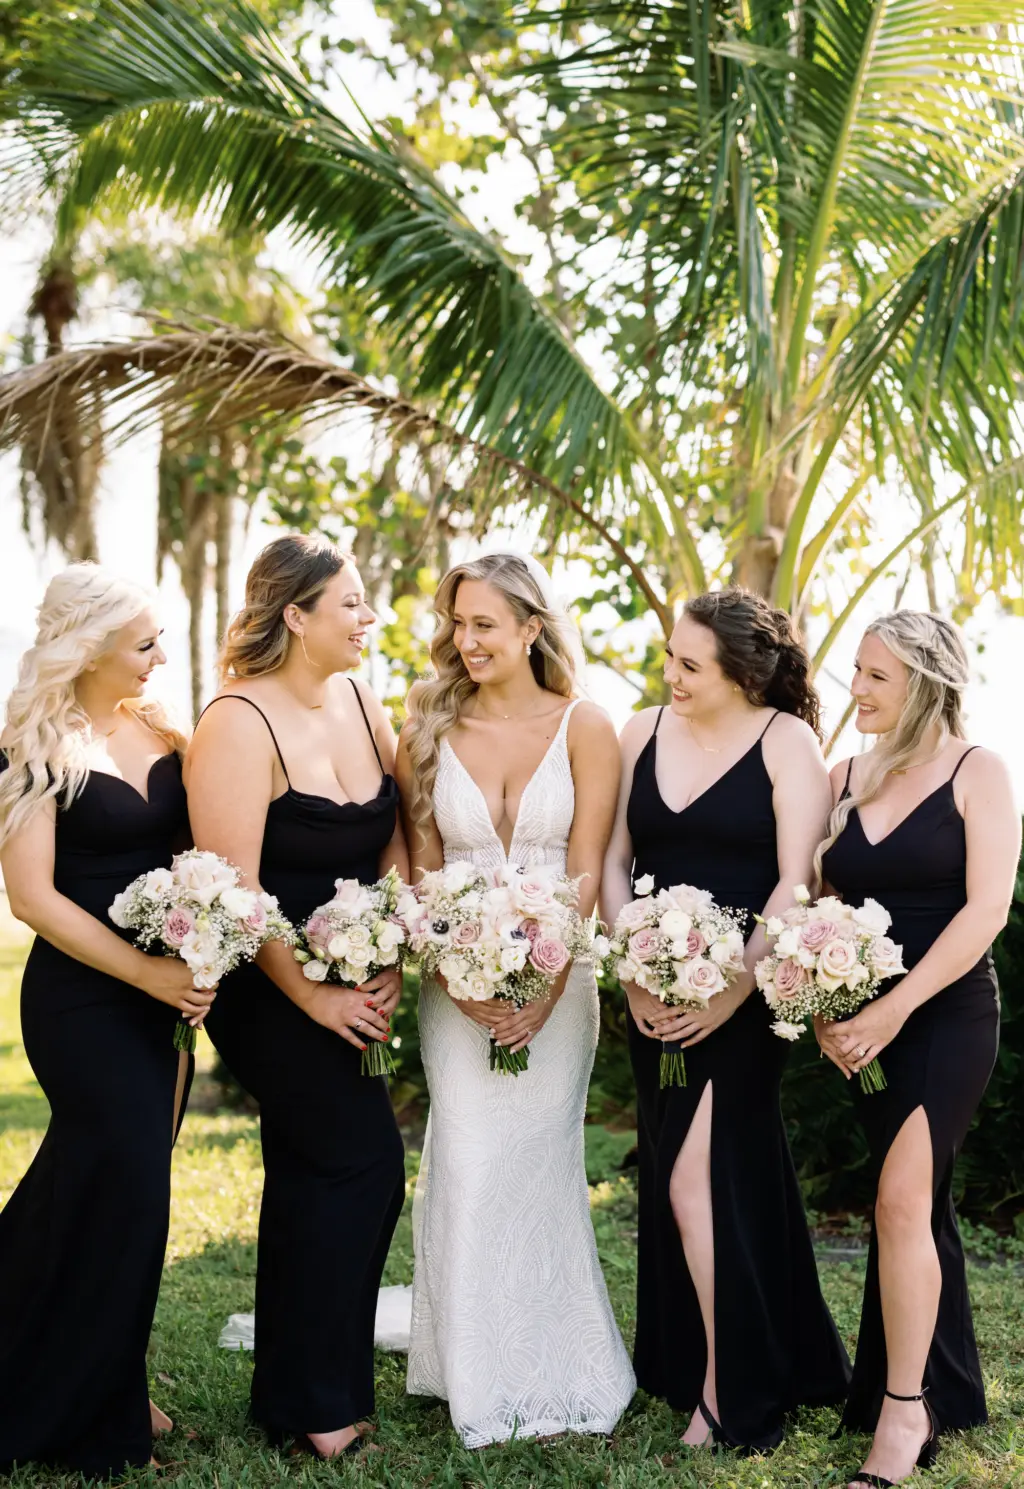 Formal Black Floor Length Windsor Bridesmaids Dresses with Slit | Made With Love Bridal Wedding Dress Inspiration | White and Blush Pink Spring Bouquets